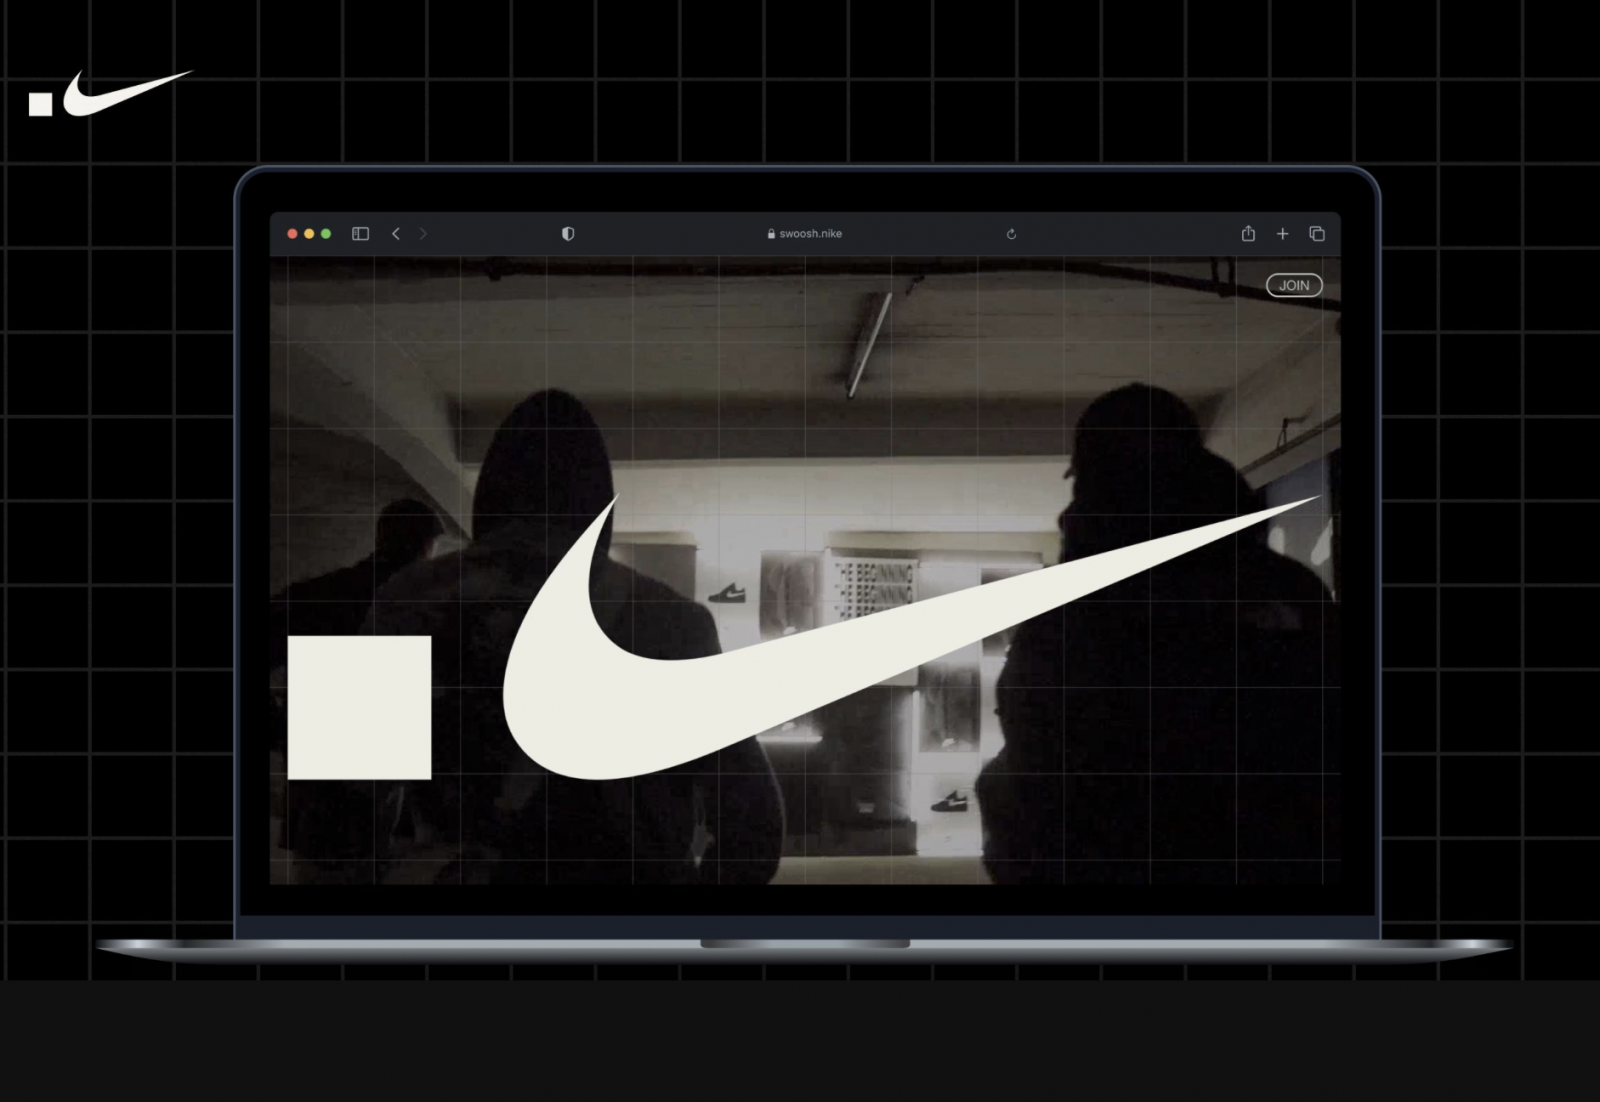 Nike Swoosh Logo Takes On Entirely New Meaning